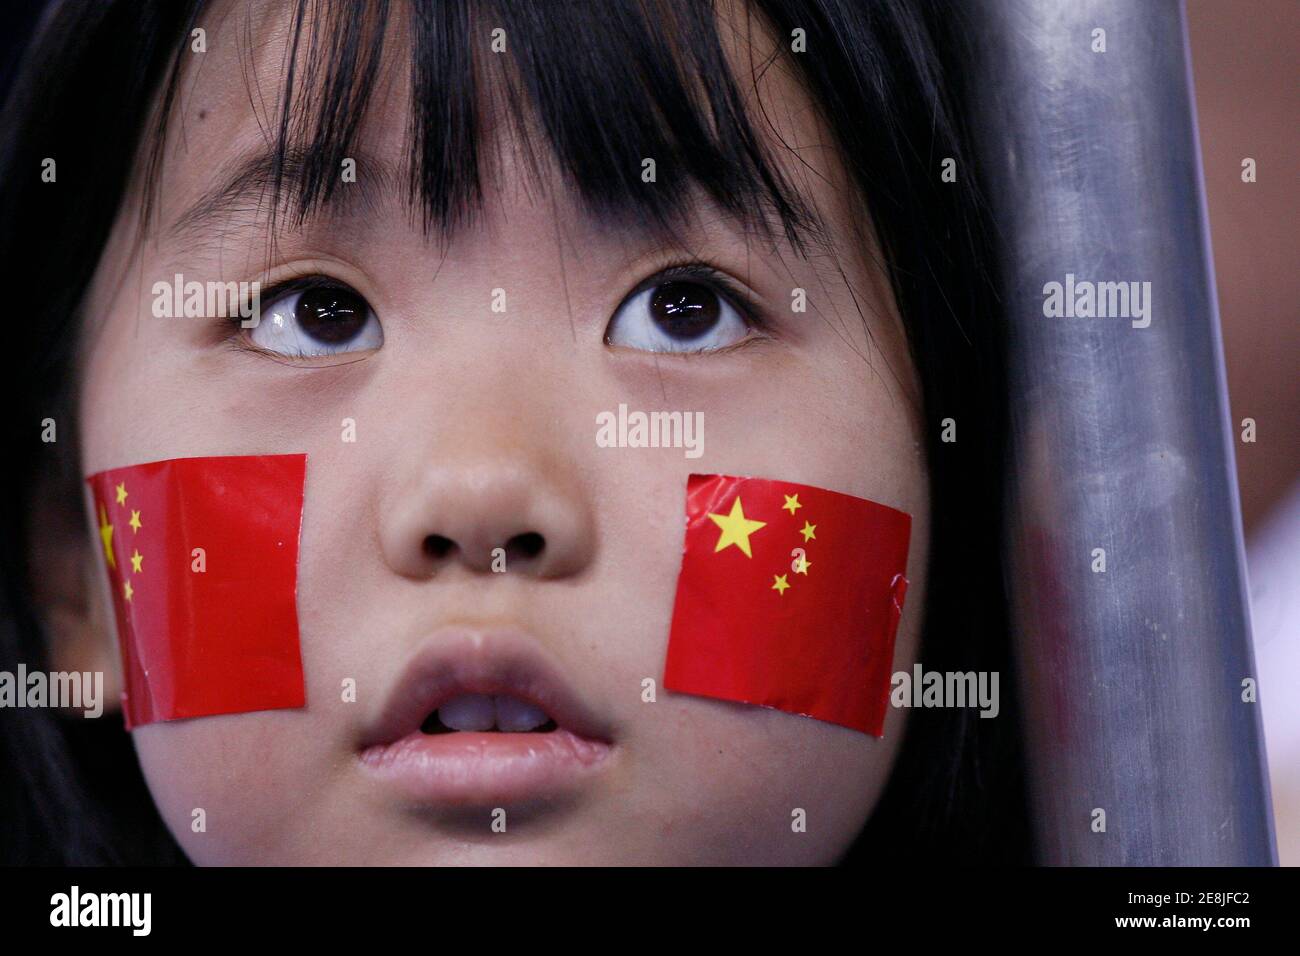 A young girl watches the men's singles quarterfinal table tennis match between Wang Hao of China and Ko Lai Chak of Hong Kong at the Beijing 2008 Olympic Games August 22, 2008.     REUTERS/Beawiharta (CHINA) Stock Photo